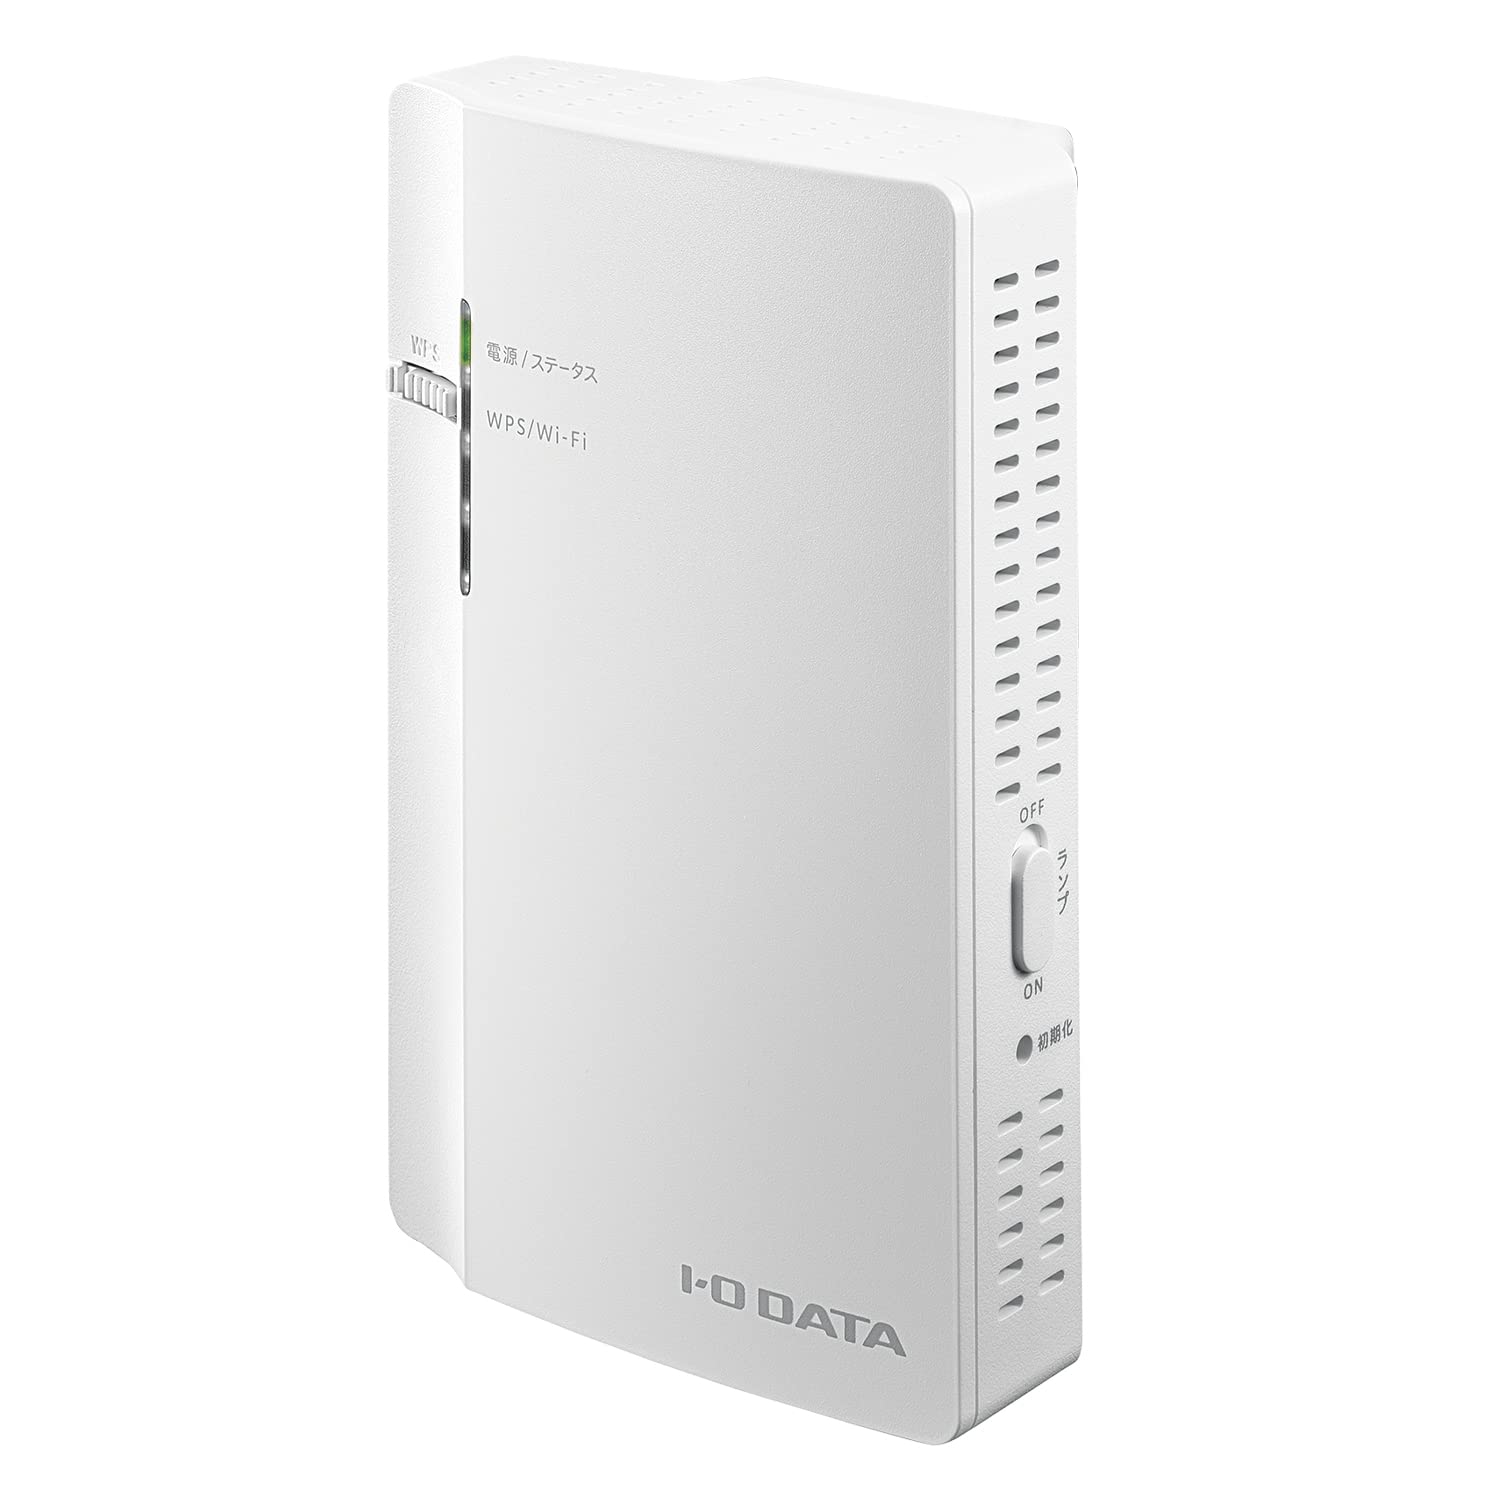 ǡ IODATA WiFi 롼 󥻥ľޤ Wi-Fi 6 11ax 1201+574Mbps ѥ  iPhone/android/PS5 ܥ᡼ WN-DAX1800GRN